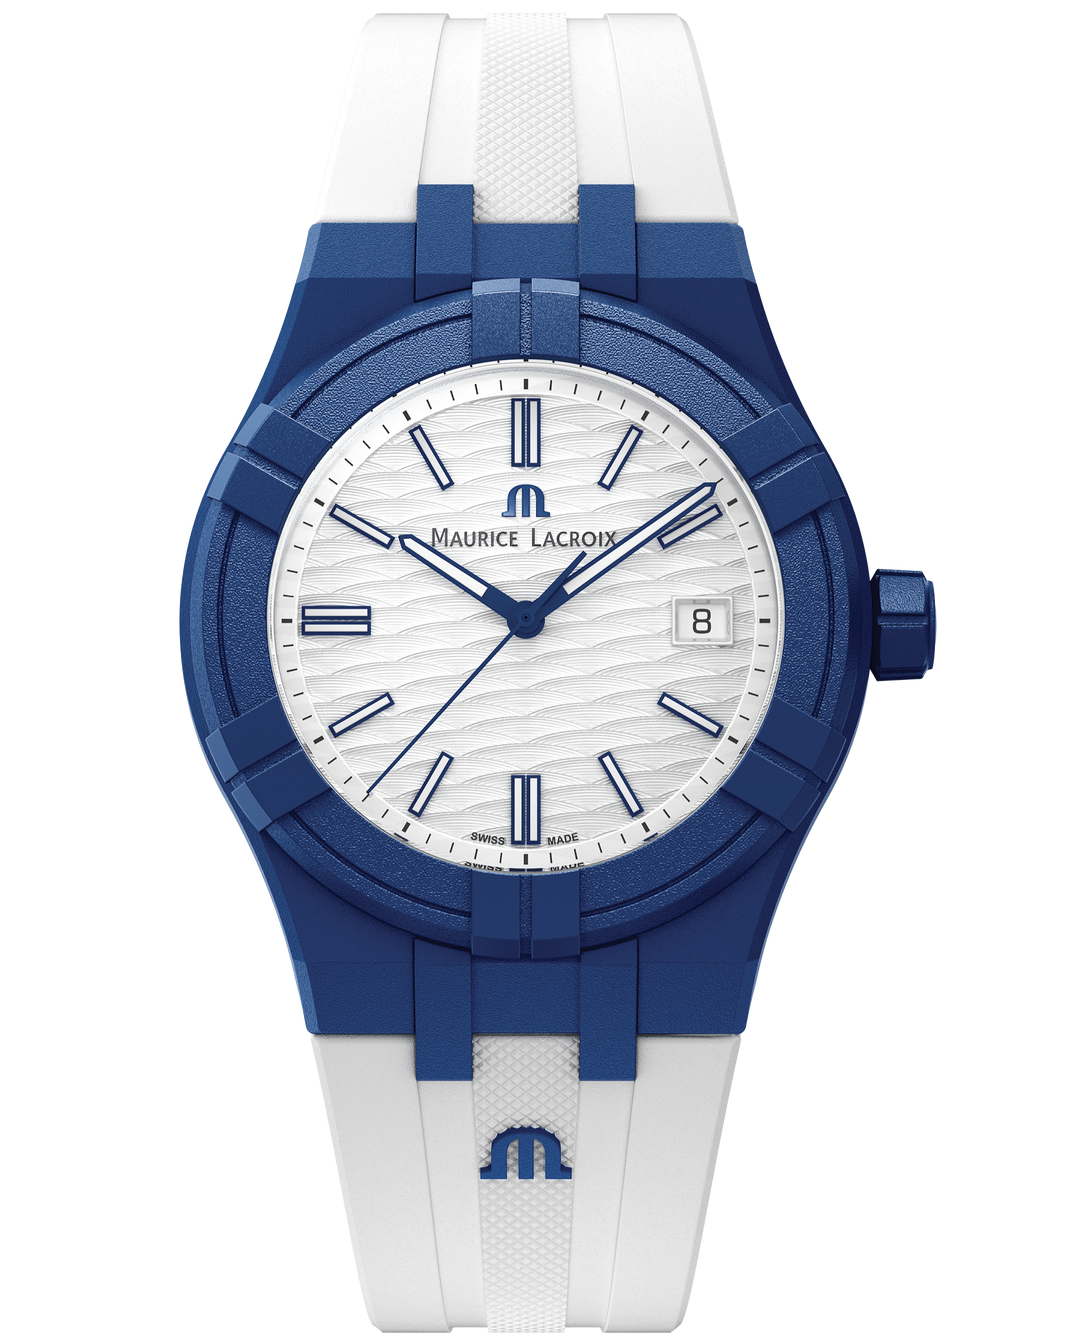 Maurice Lacroix Watch Maurice Lacroix Swiss-made AIKON #Tide Date 40mm Blue Authentic Watch Authentic Watch I Maurice Lacroix Swiss-made AIKON #Tide 40mm Blue  Brand